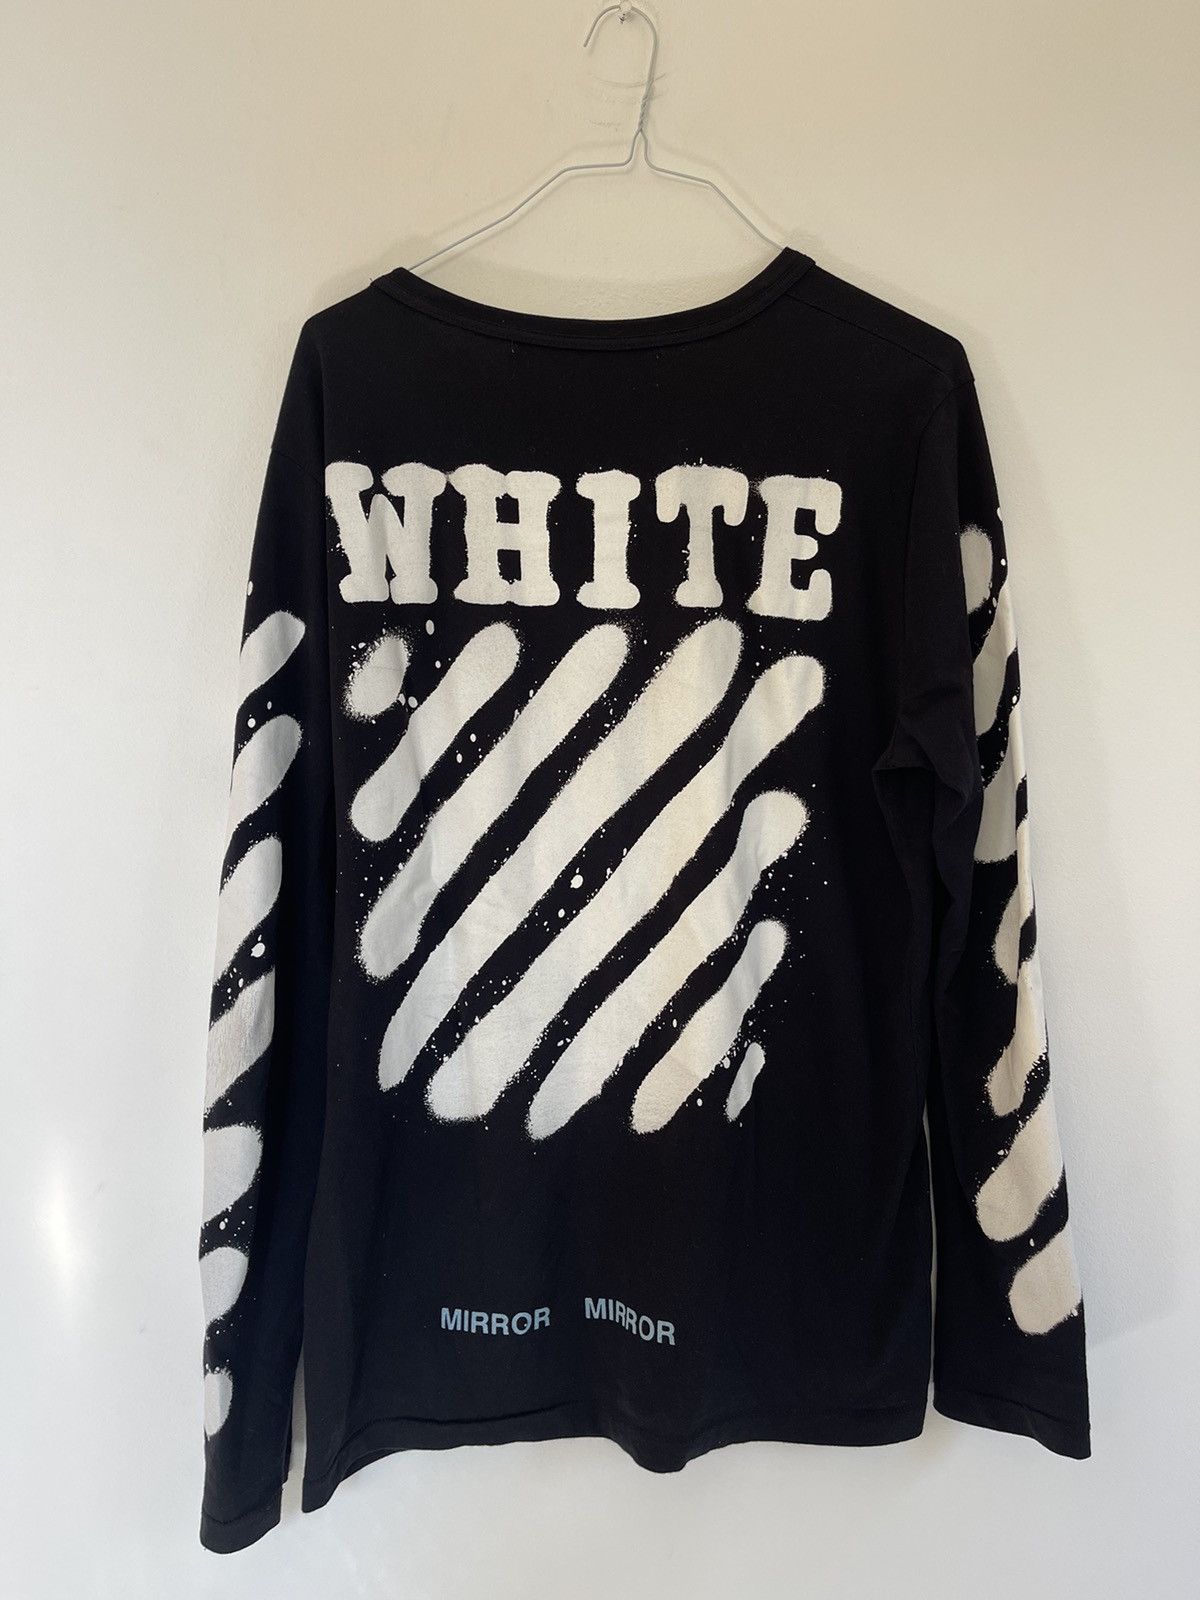 Off White Spray Paint Long Sleeve Shirt - その他